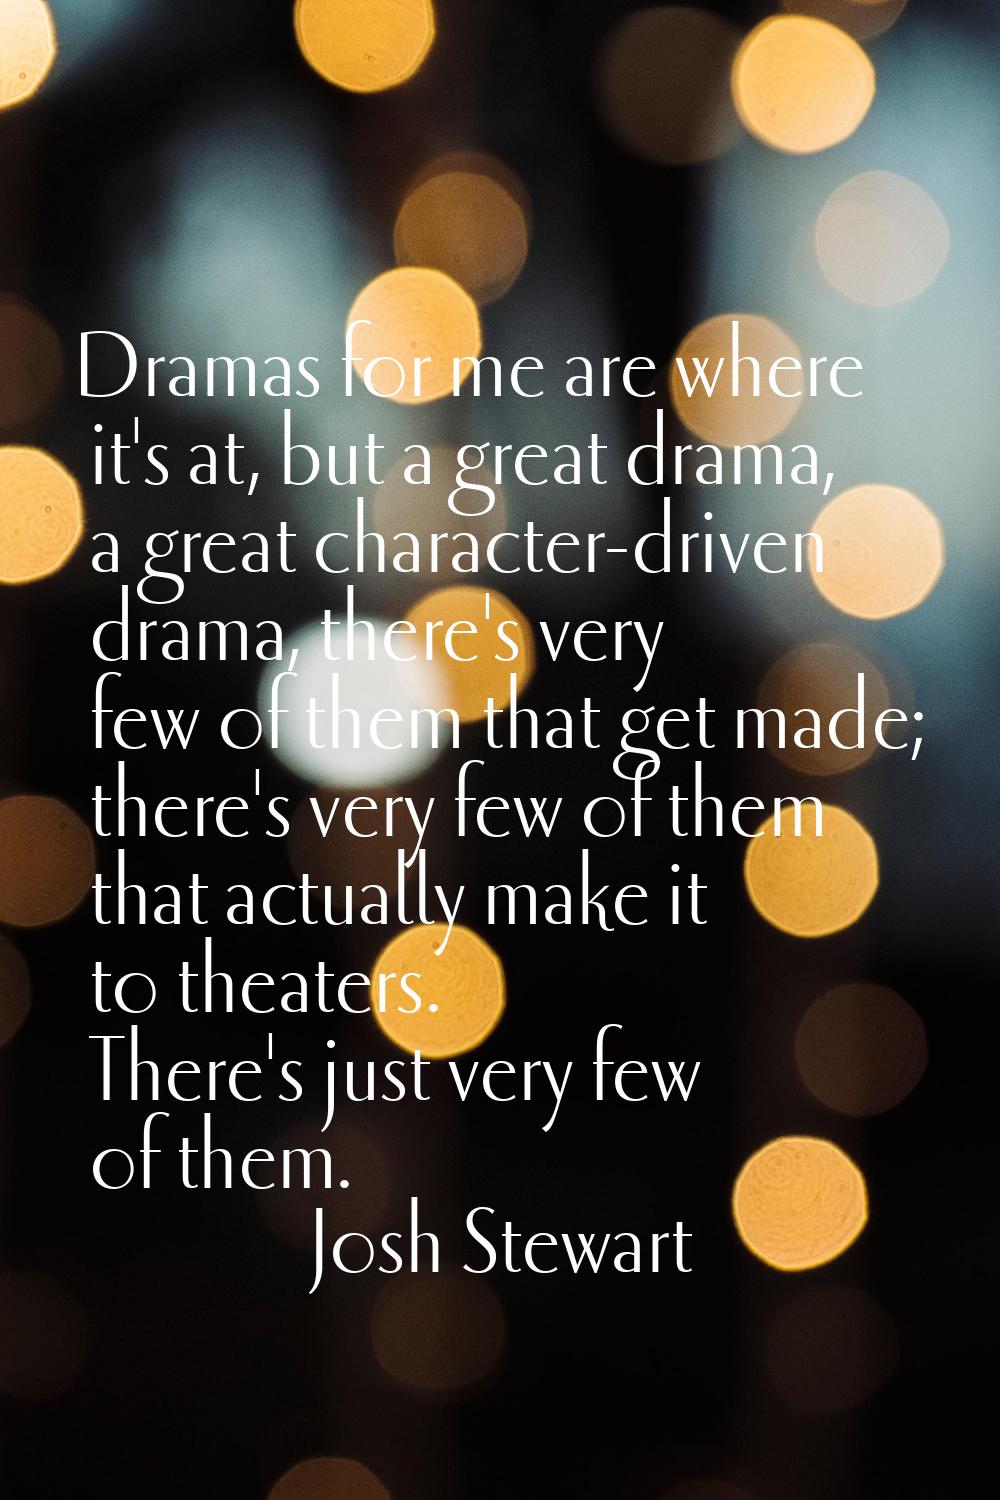 Dramas for me are where it's at, but a great drama, a great character-driven drama, there's very fe